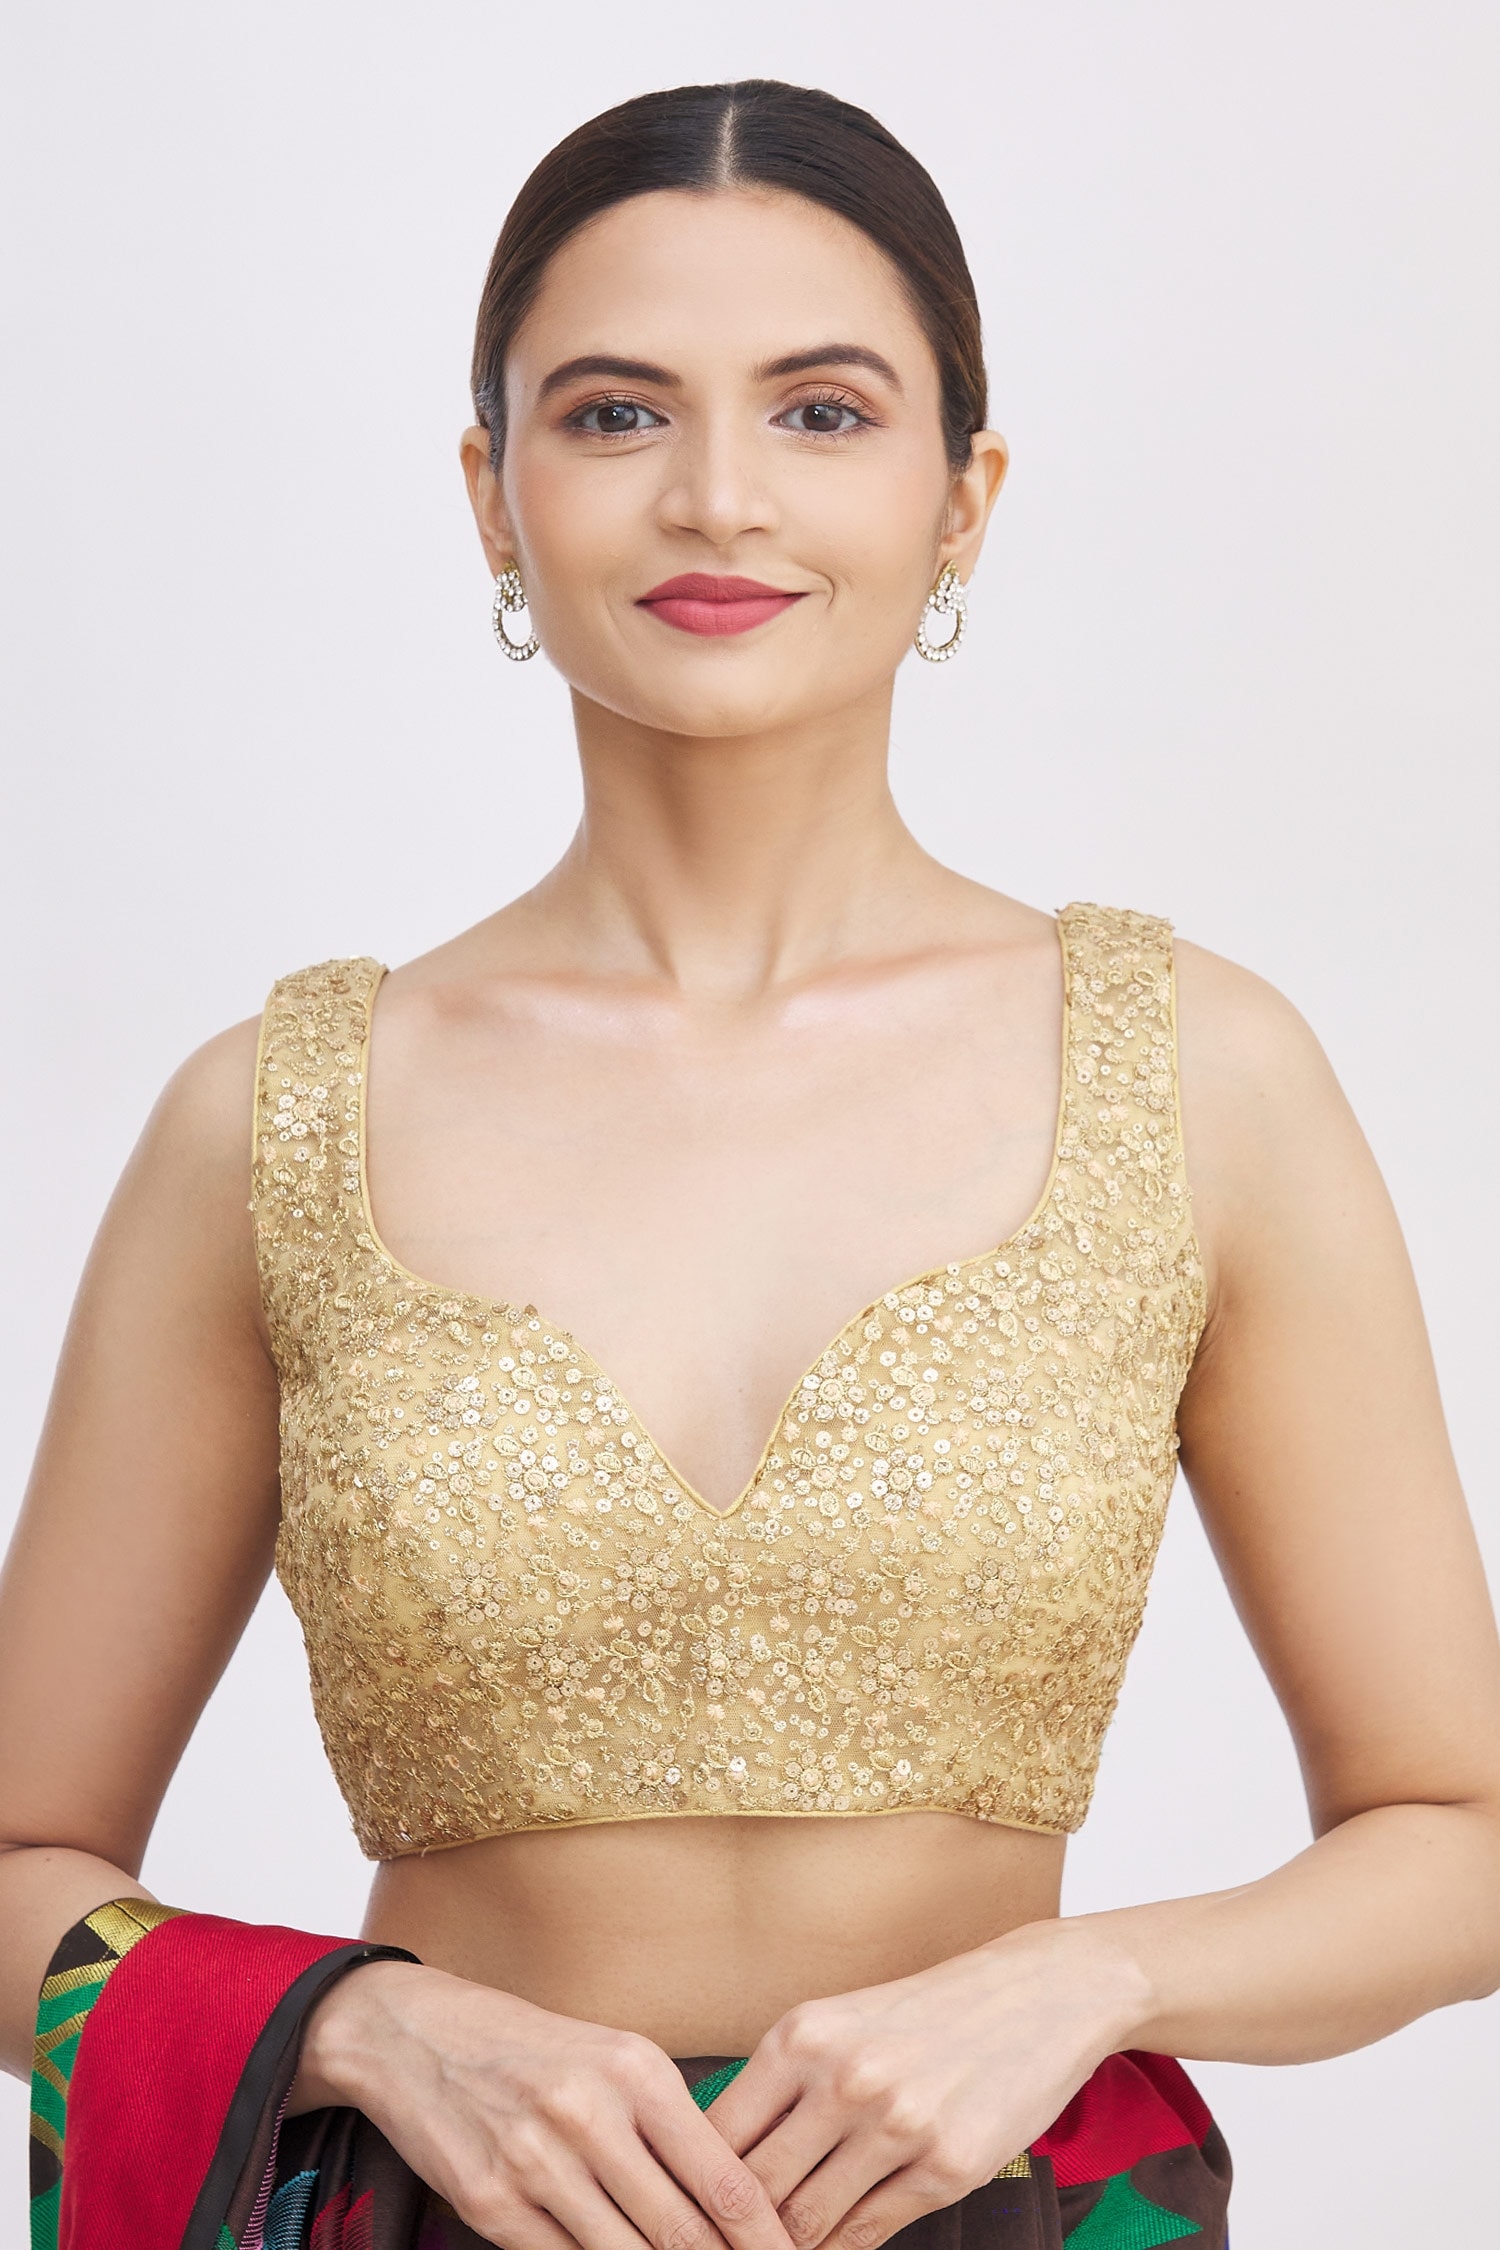 Gold Saree Blouse - Buy Latest Designer Golden Blouse at 60% off on Myntra